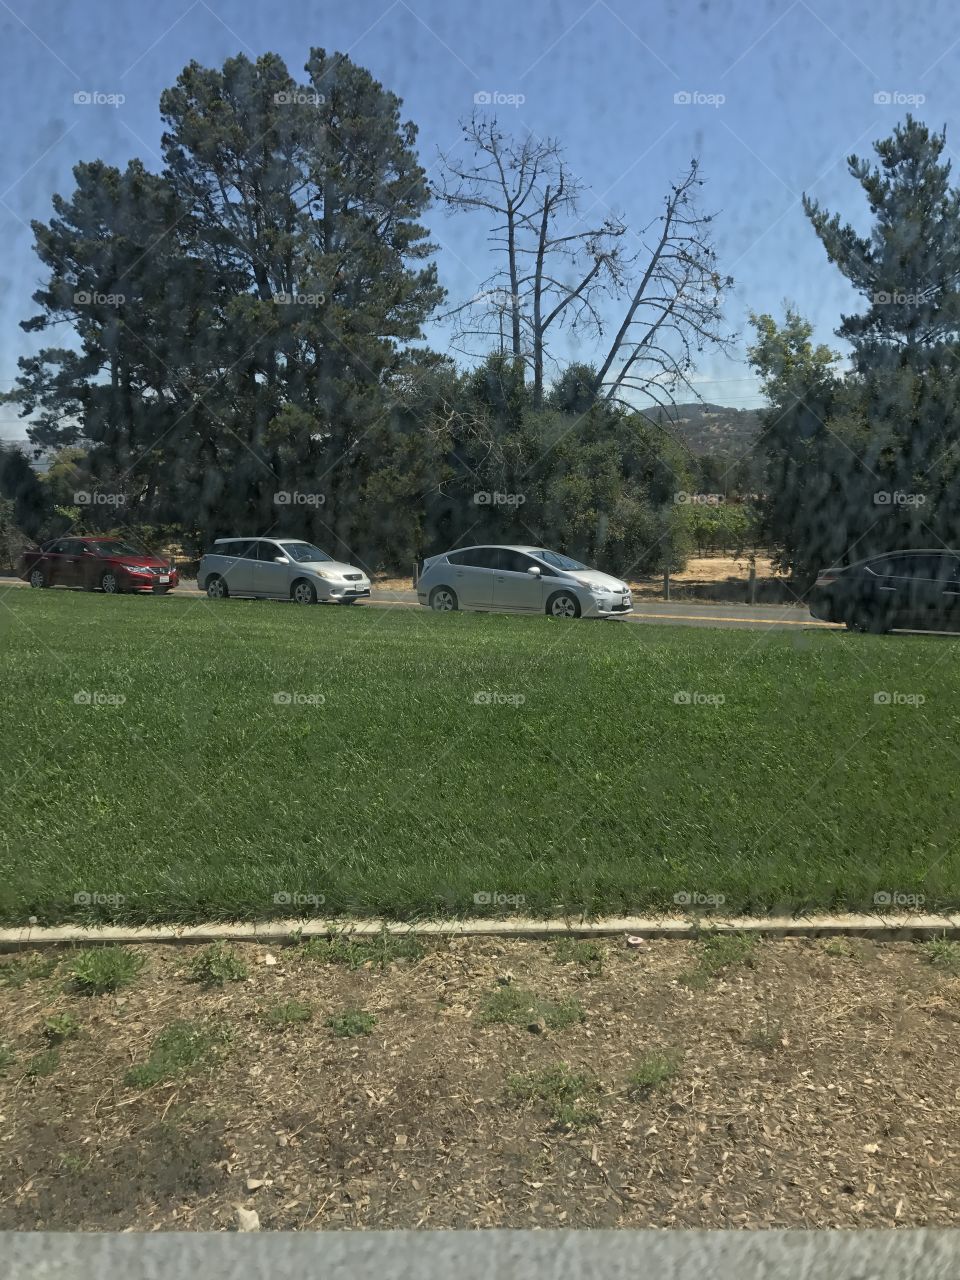 Cars in traffic at Napa Valley College - Tuesday afternoon